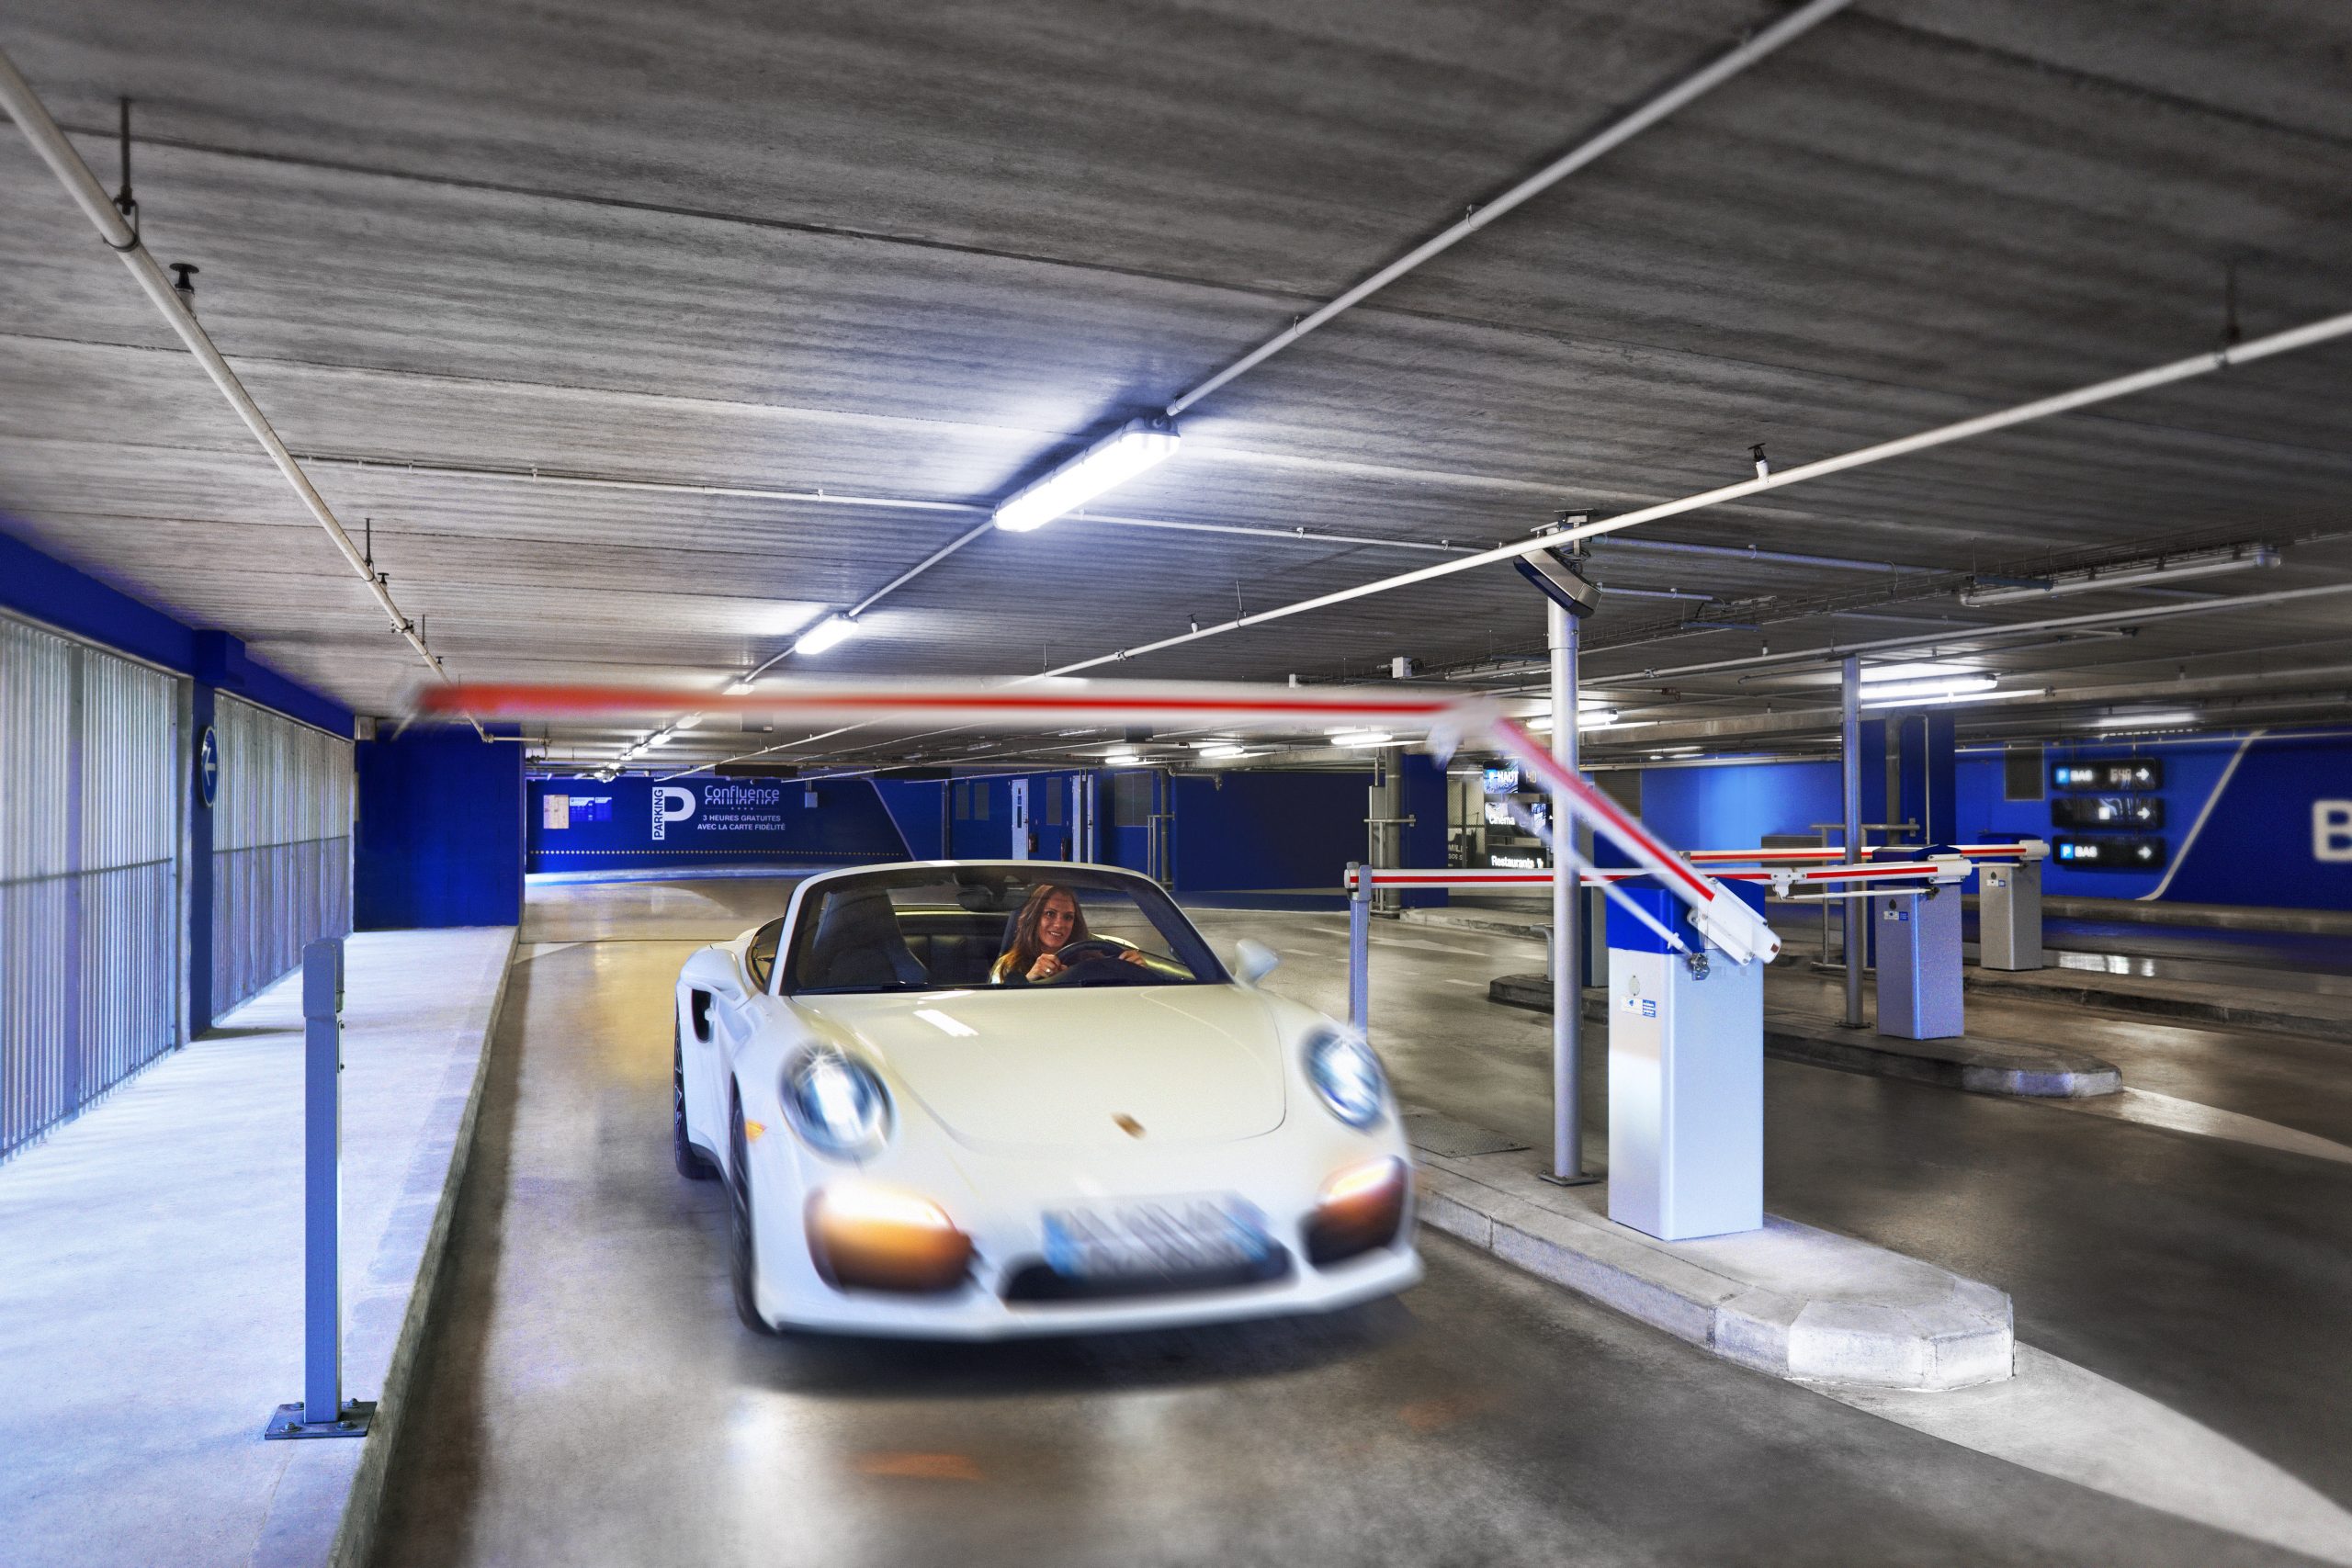 How to plan for sustainability and energy savings in a carpark